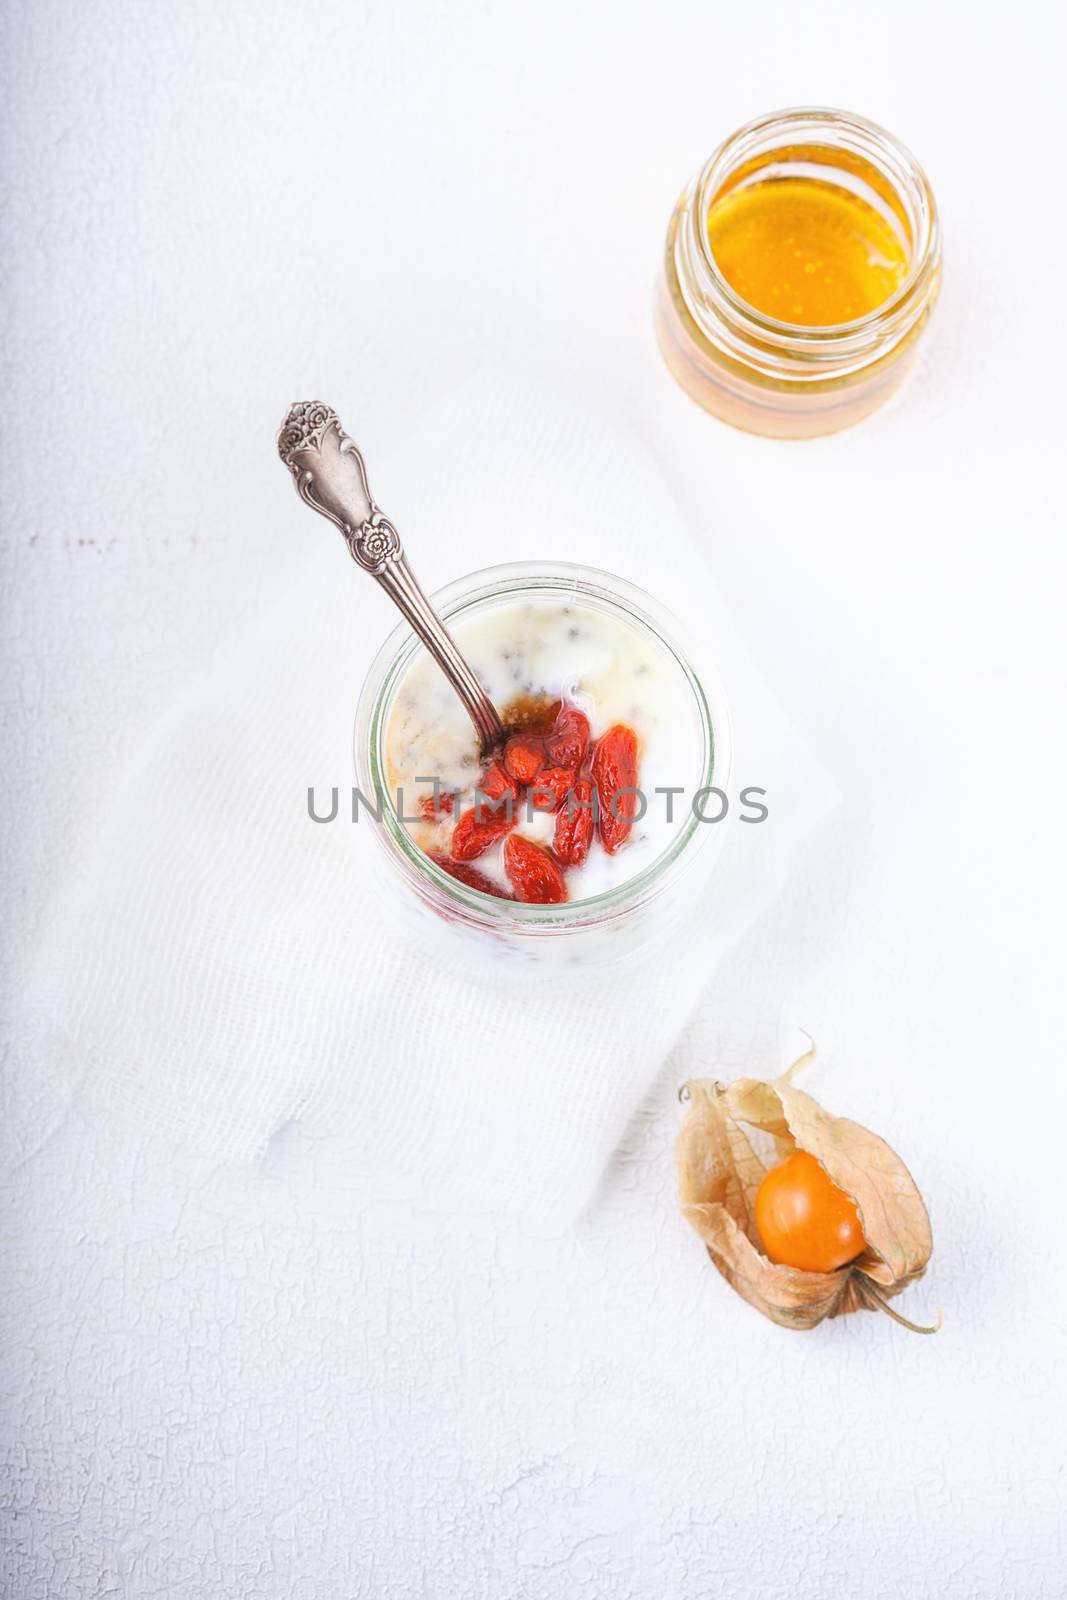 Yoghurt with goji berries, chia seeds and honey by supercat67